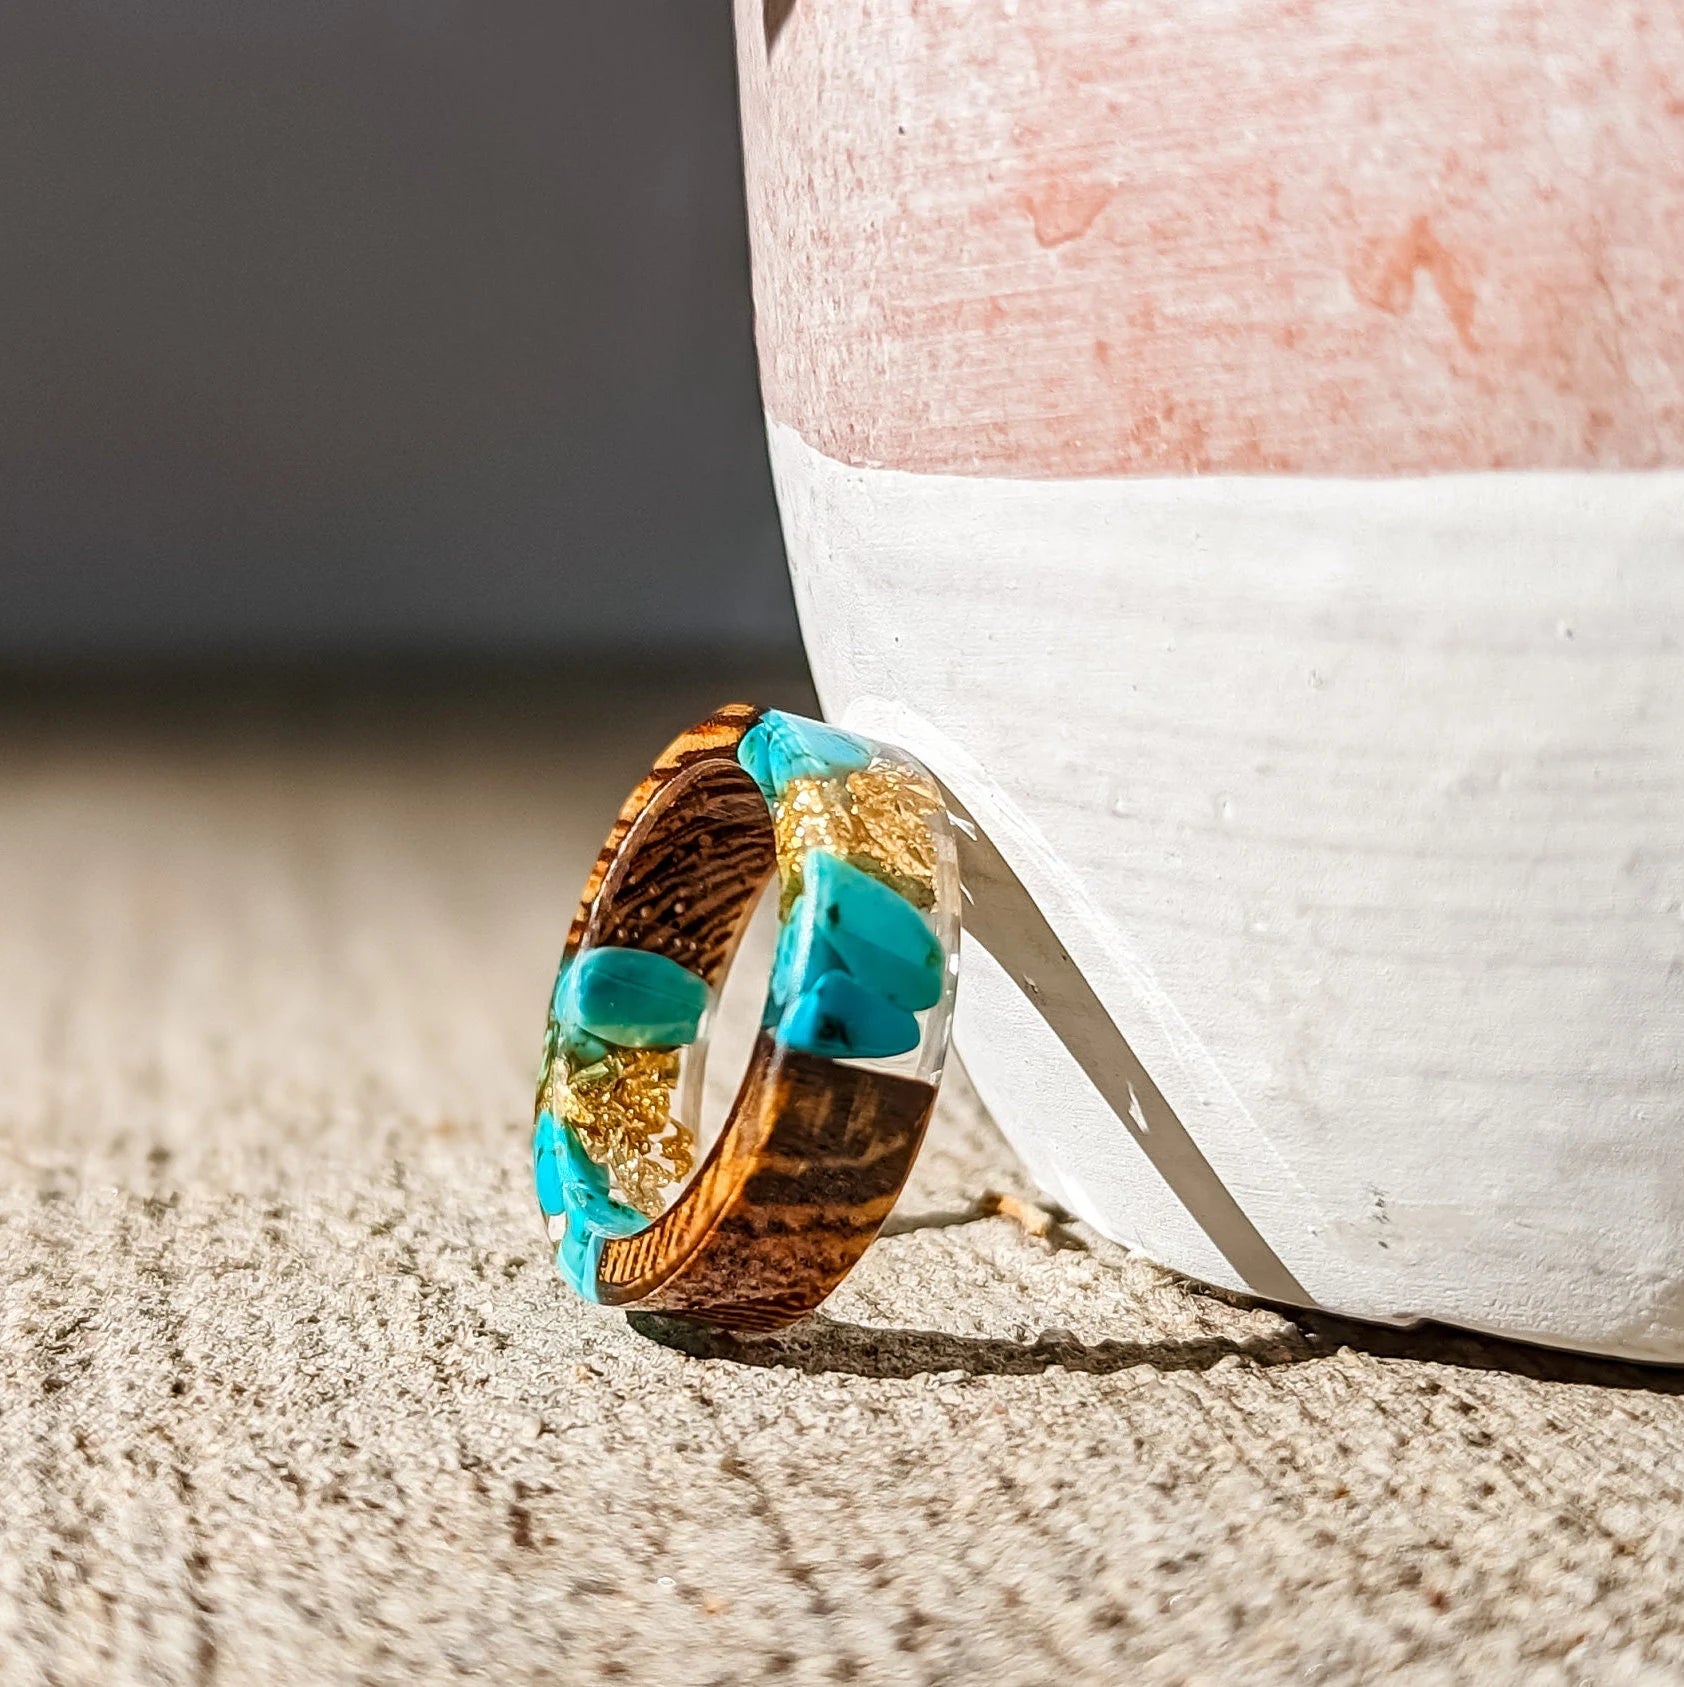 Handmade Natural Turquoise Stone With Gold Leads Resin Ring and Wood Like Accents - Turquoise Trading Co